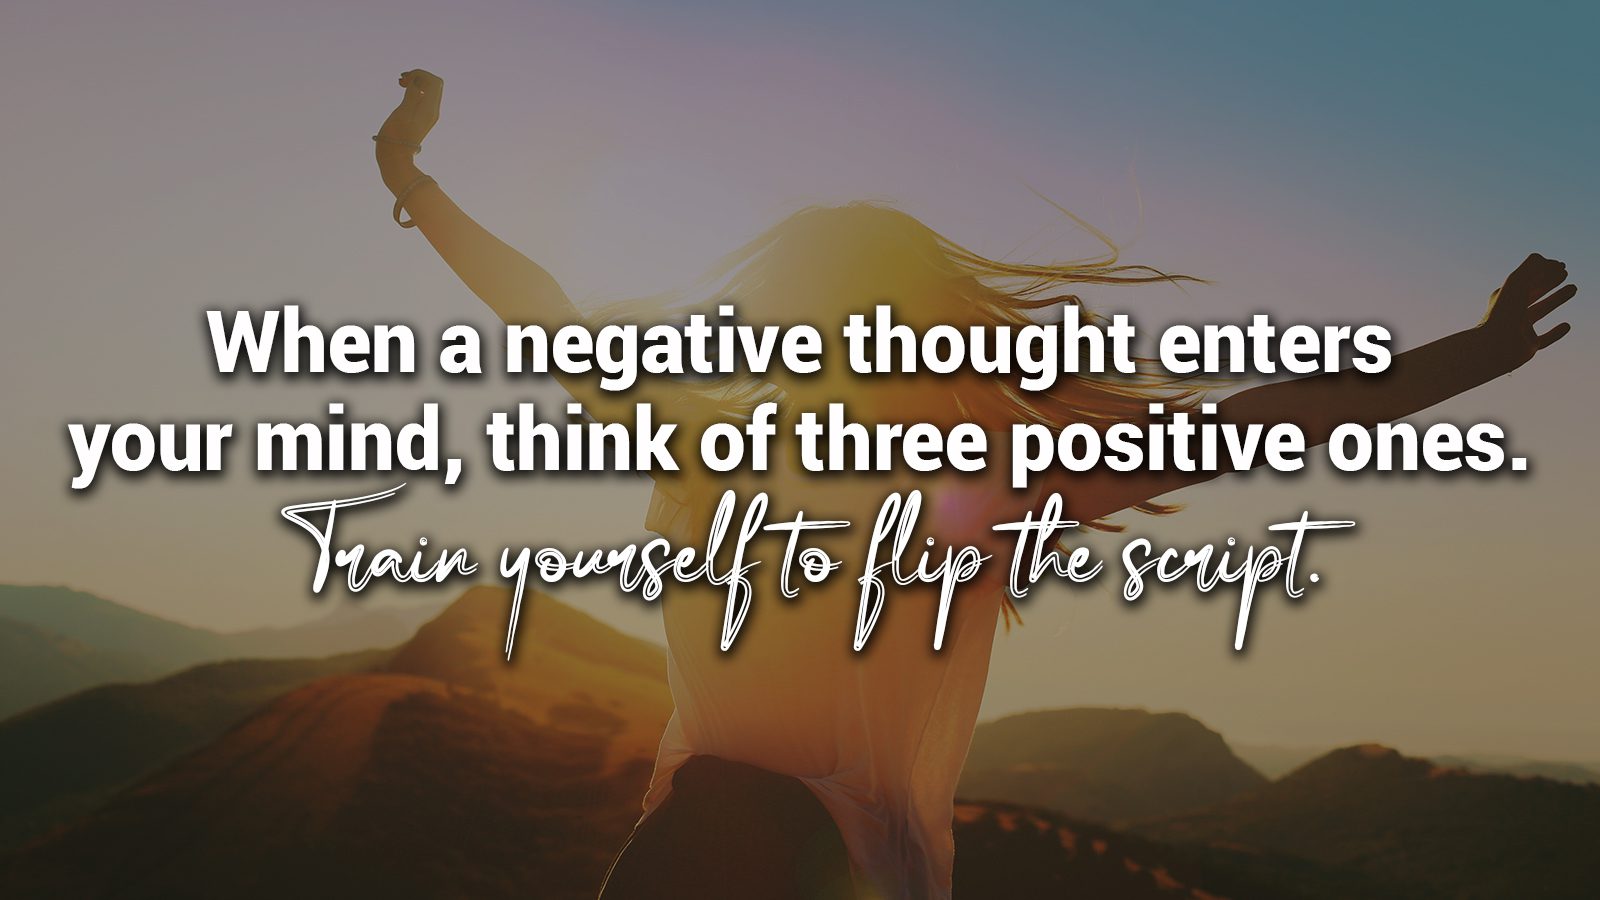 8 Ways to Flip the Script on Negative Thoughts